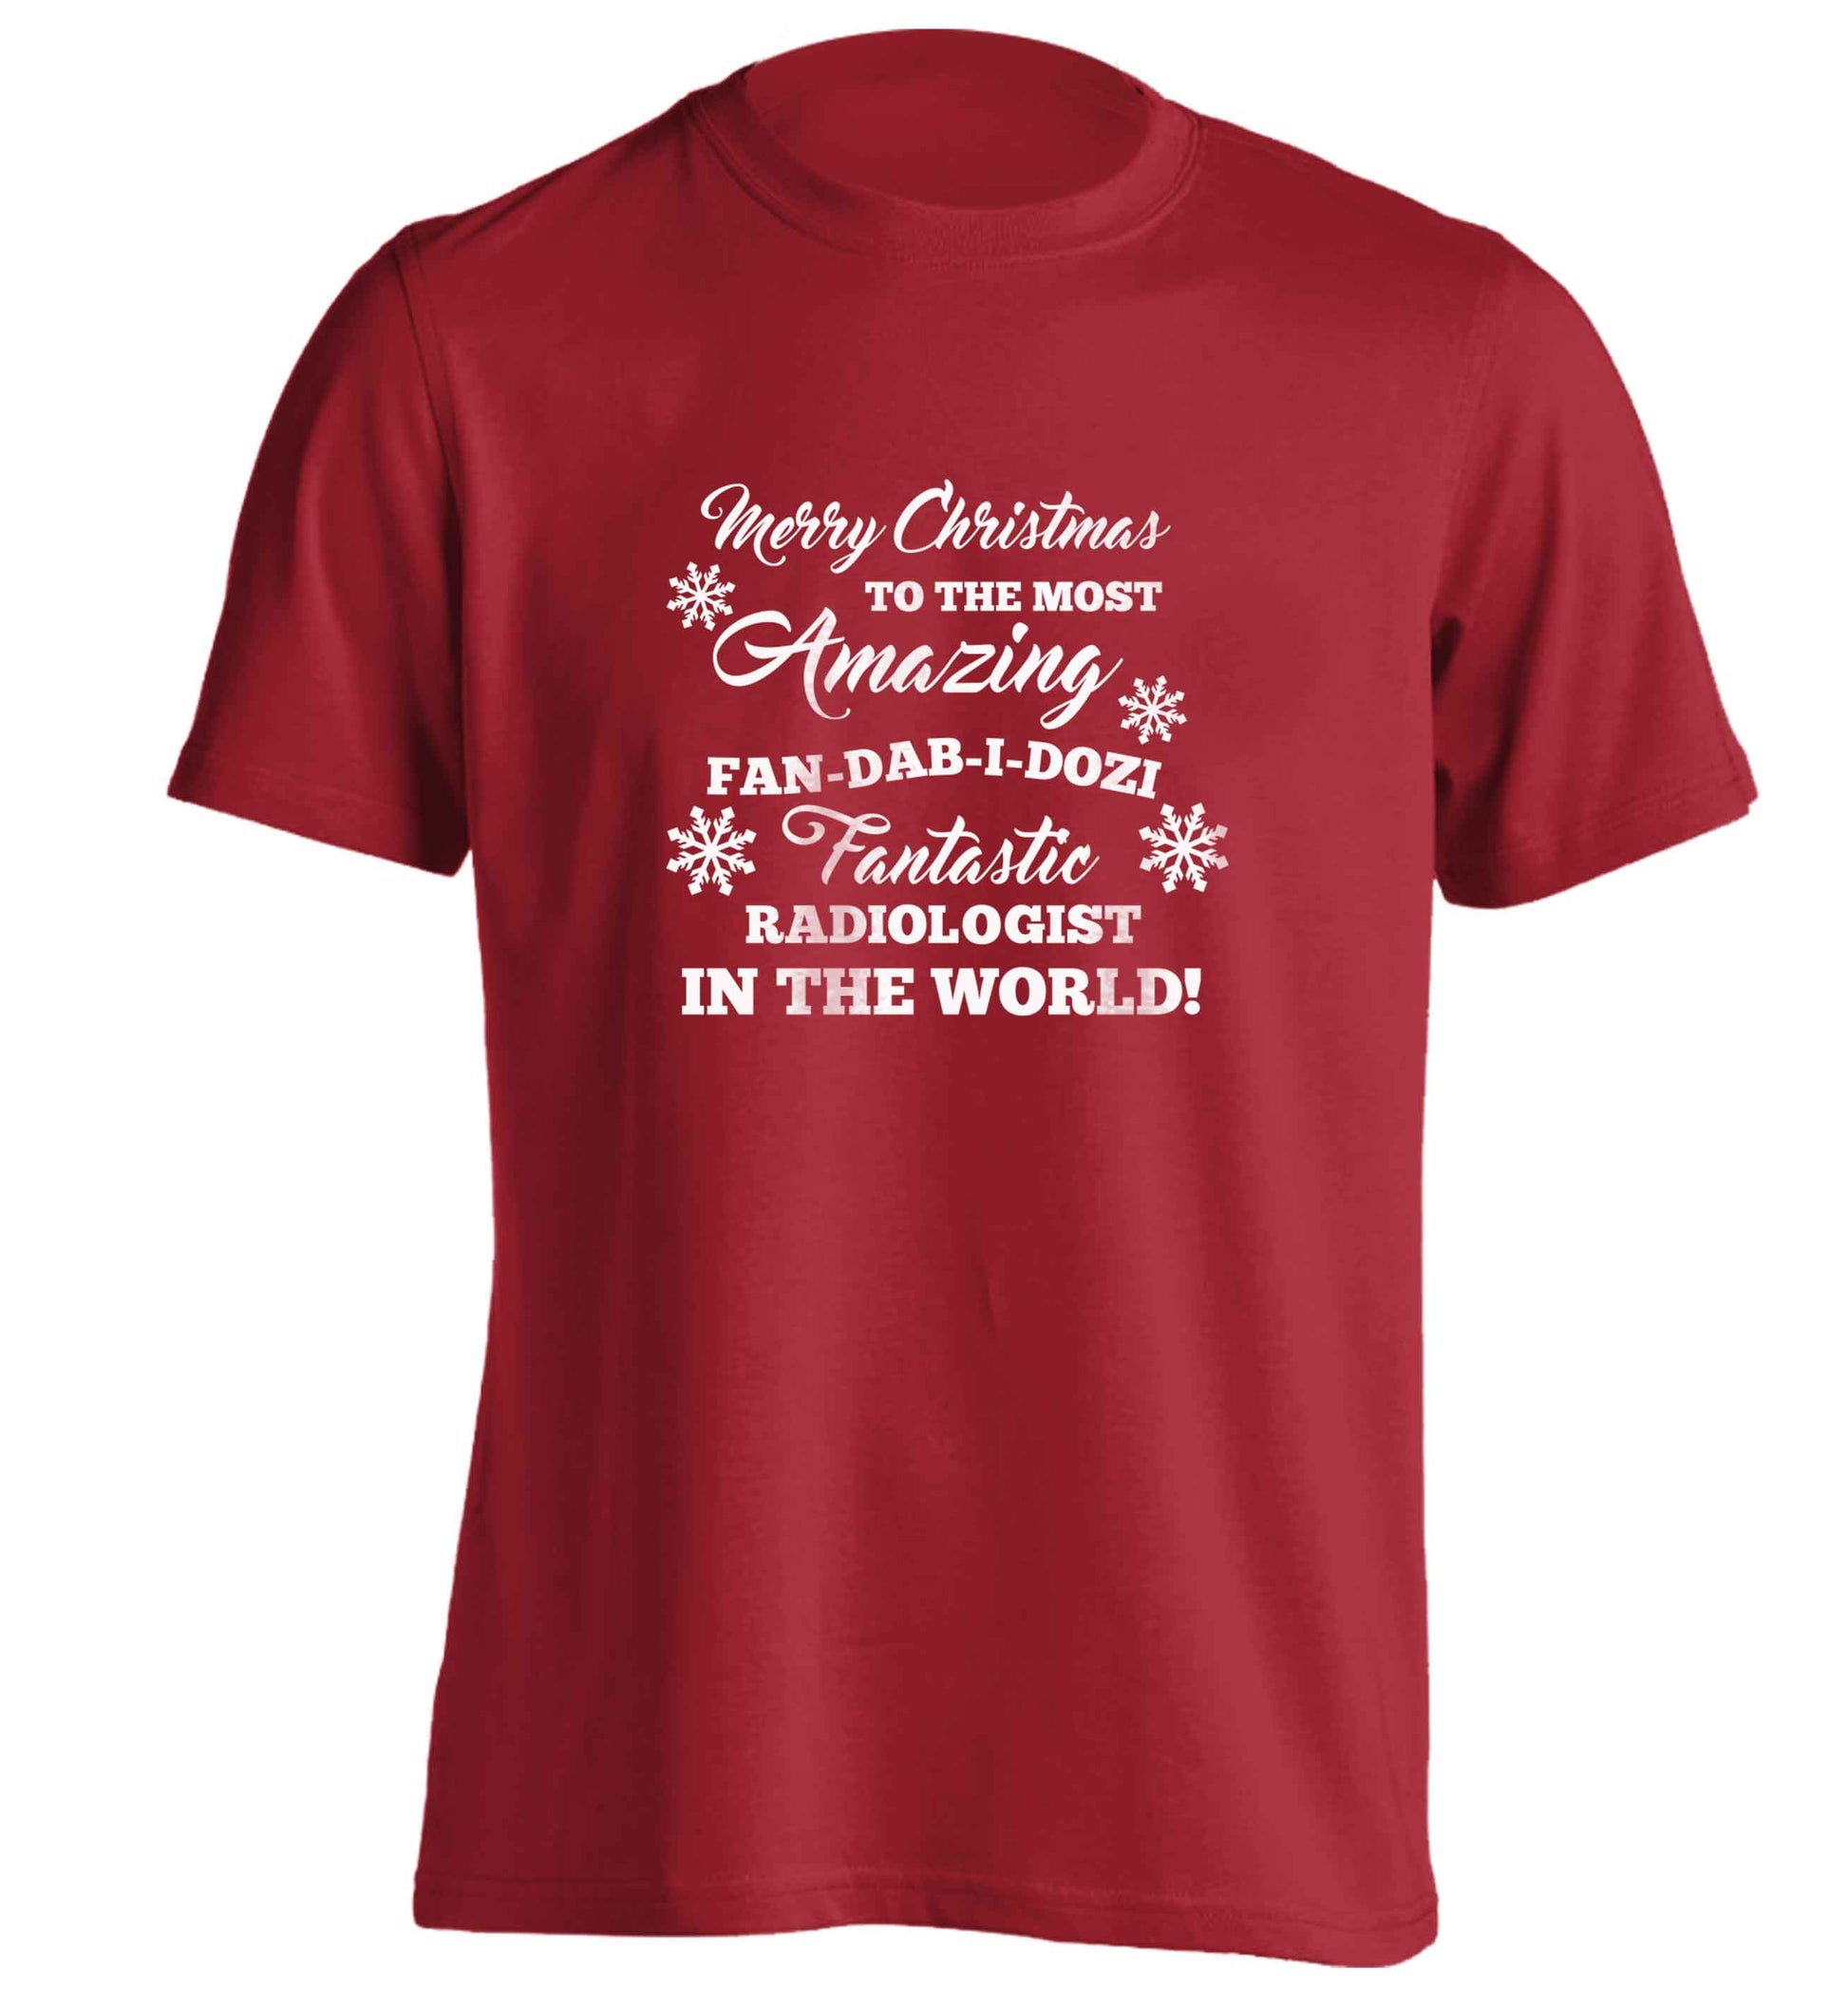 Merry Christmas to the most amazing radiologist in the world! adults unisex red Tshirt 2XL